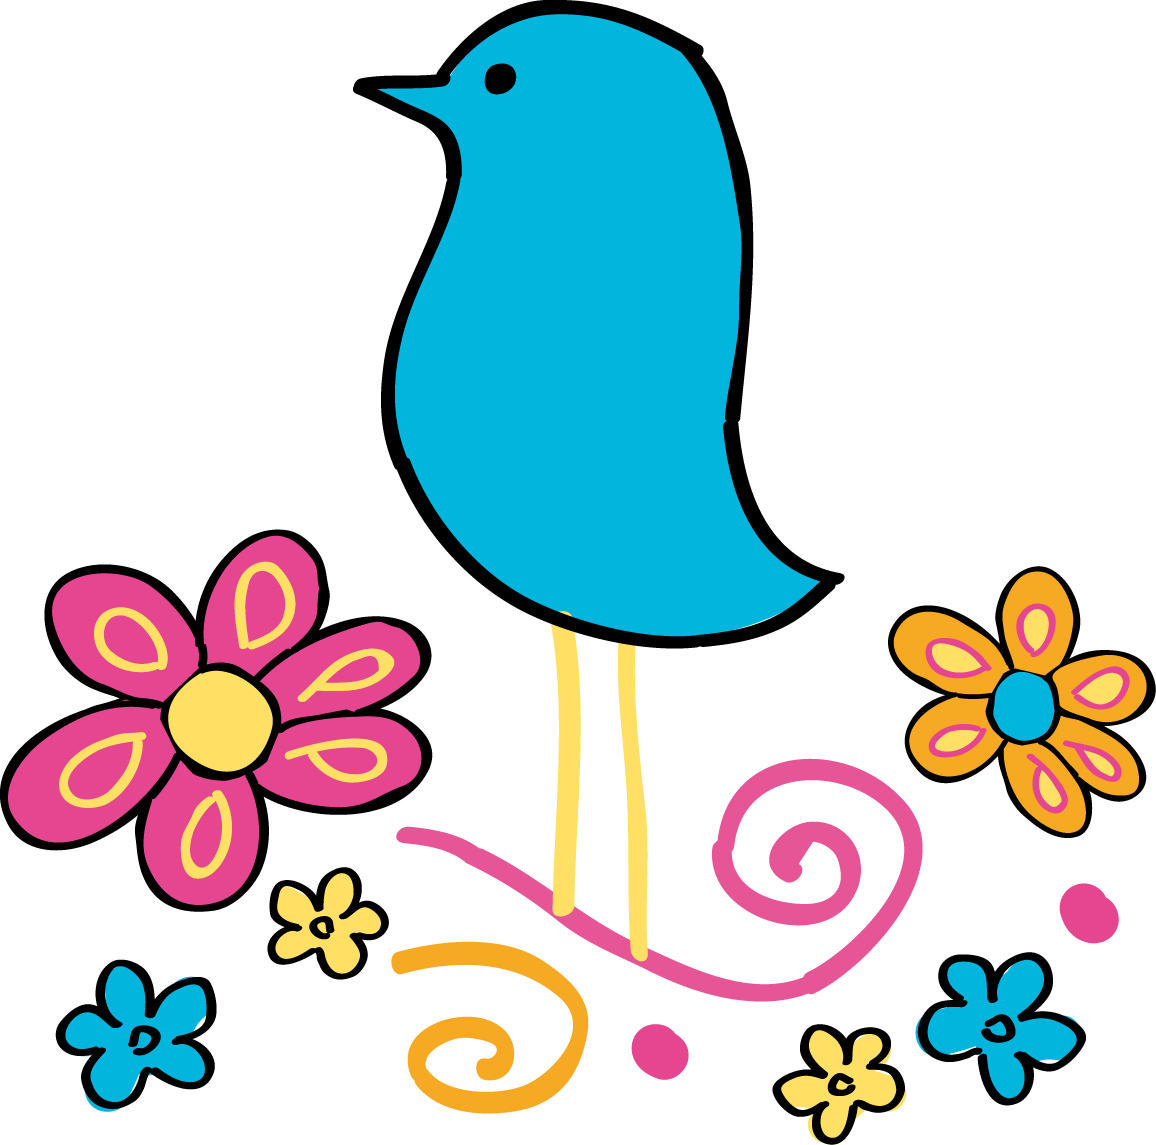 Teal Love Birds Clipart | Clipart Panda - Free Clipart Images